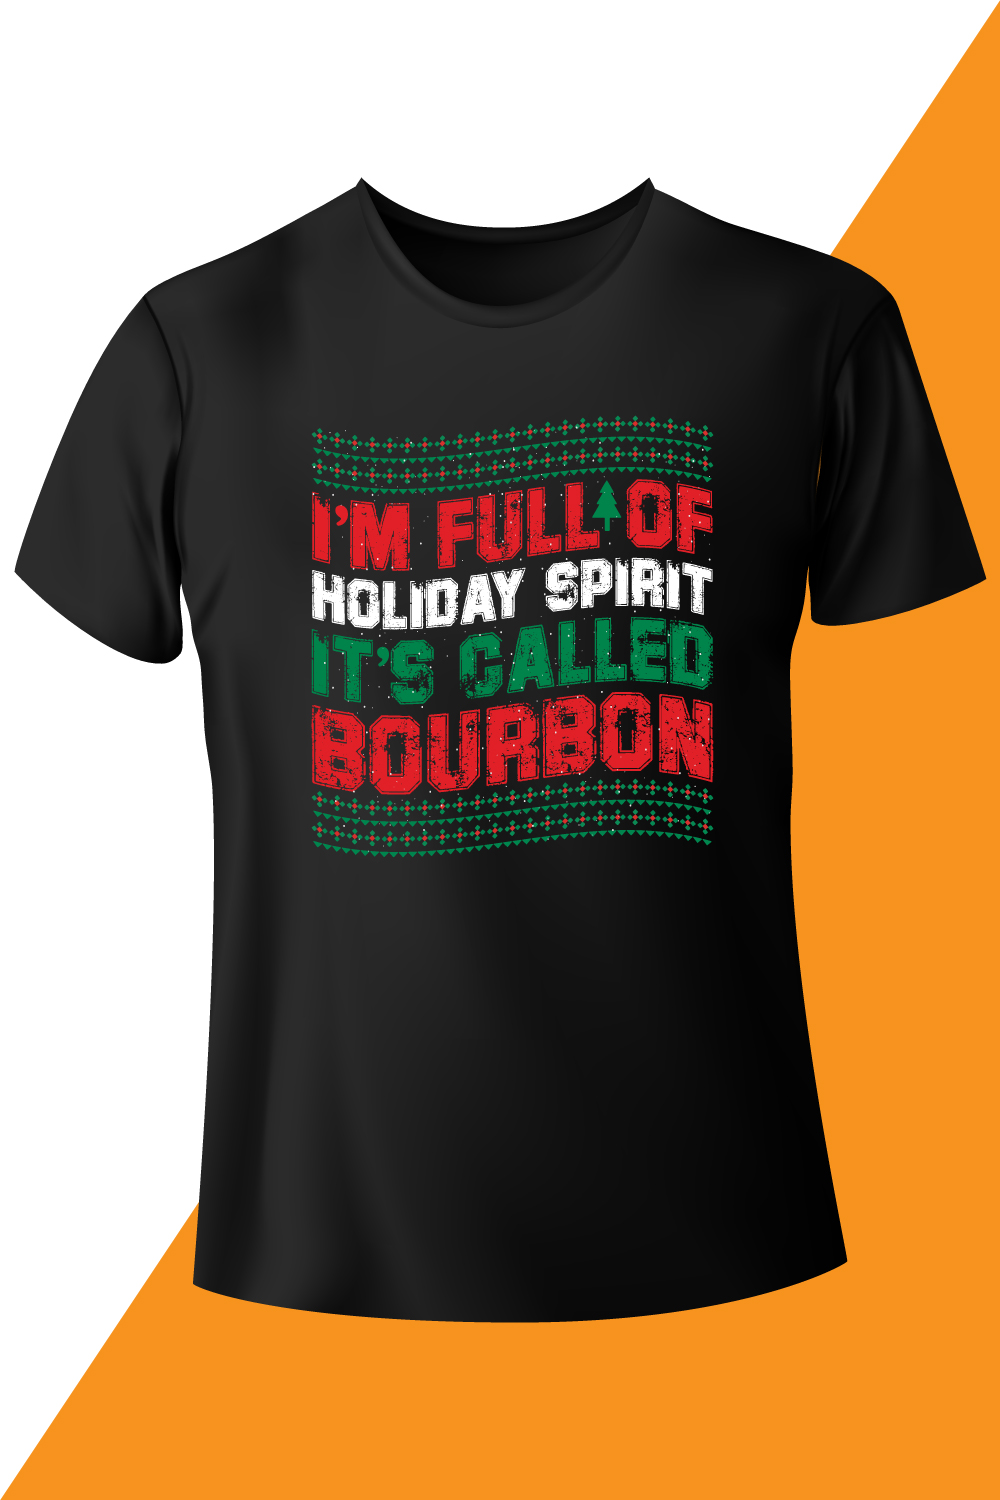 Image of a black t-shirt with irresistible slogan i'm full of holiday spirit its called bourbon.